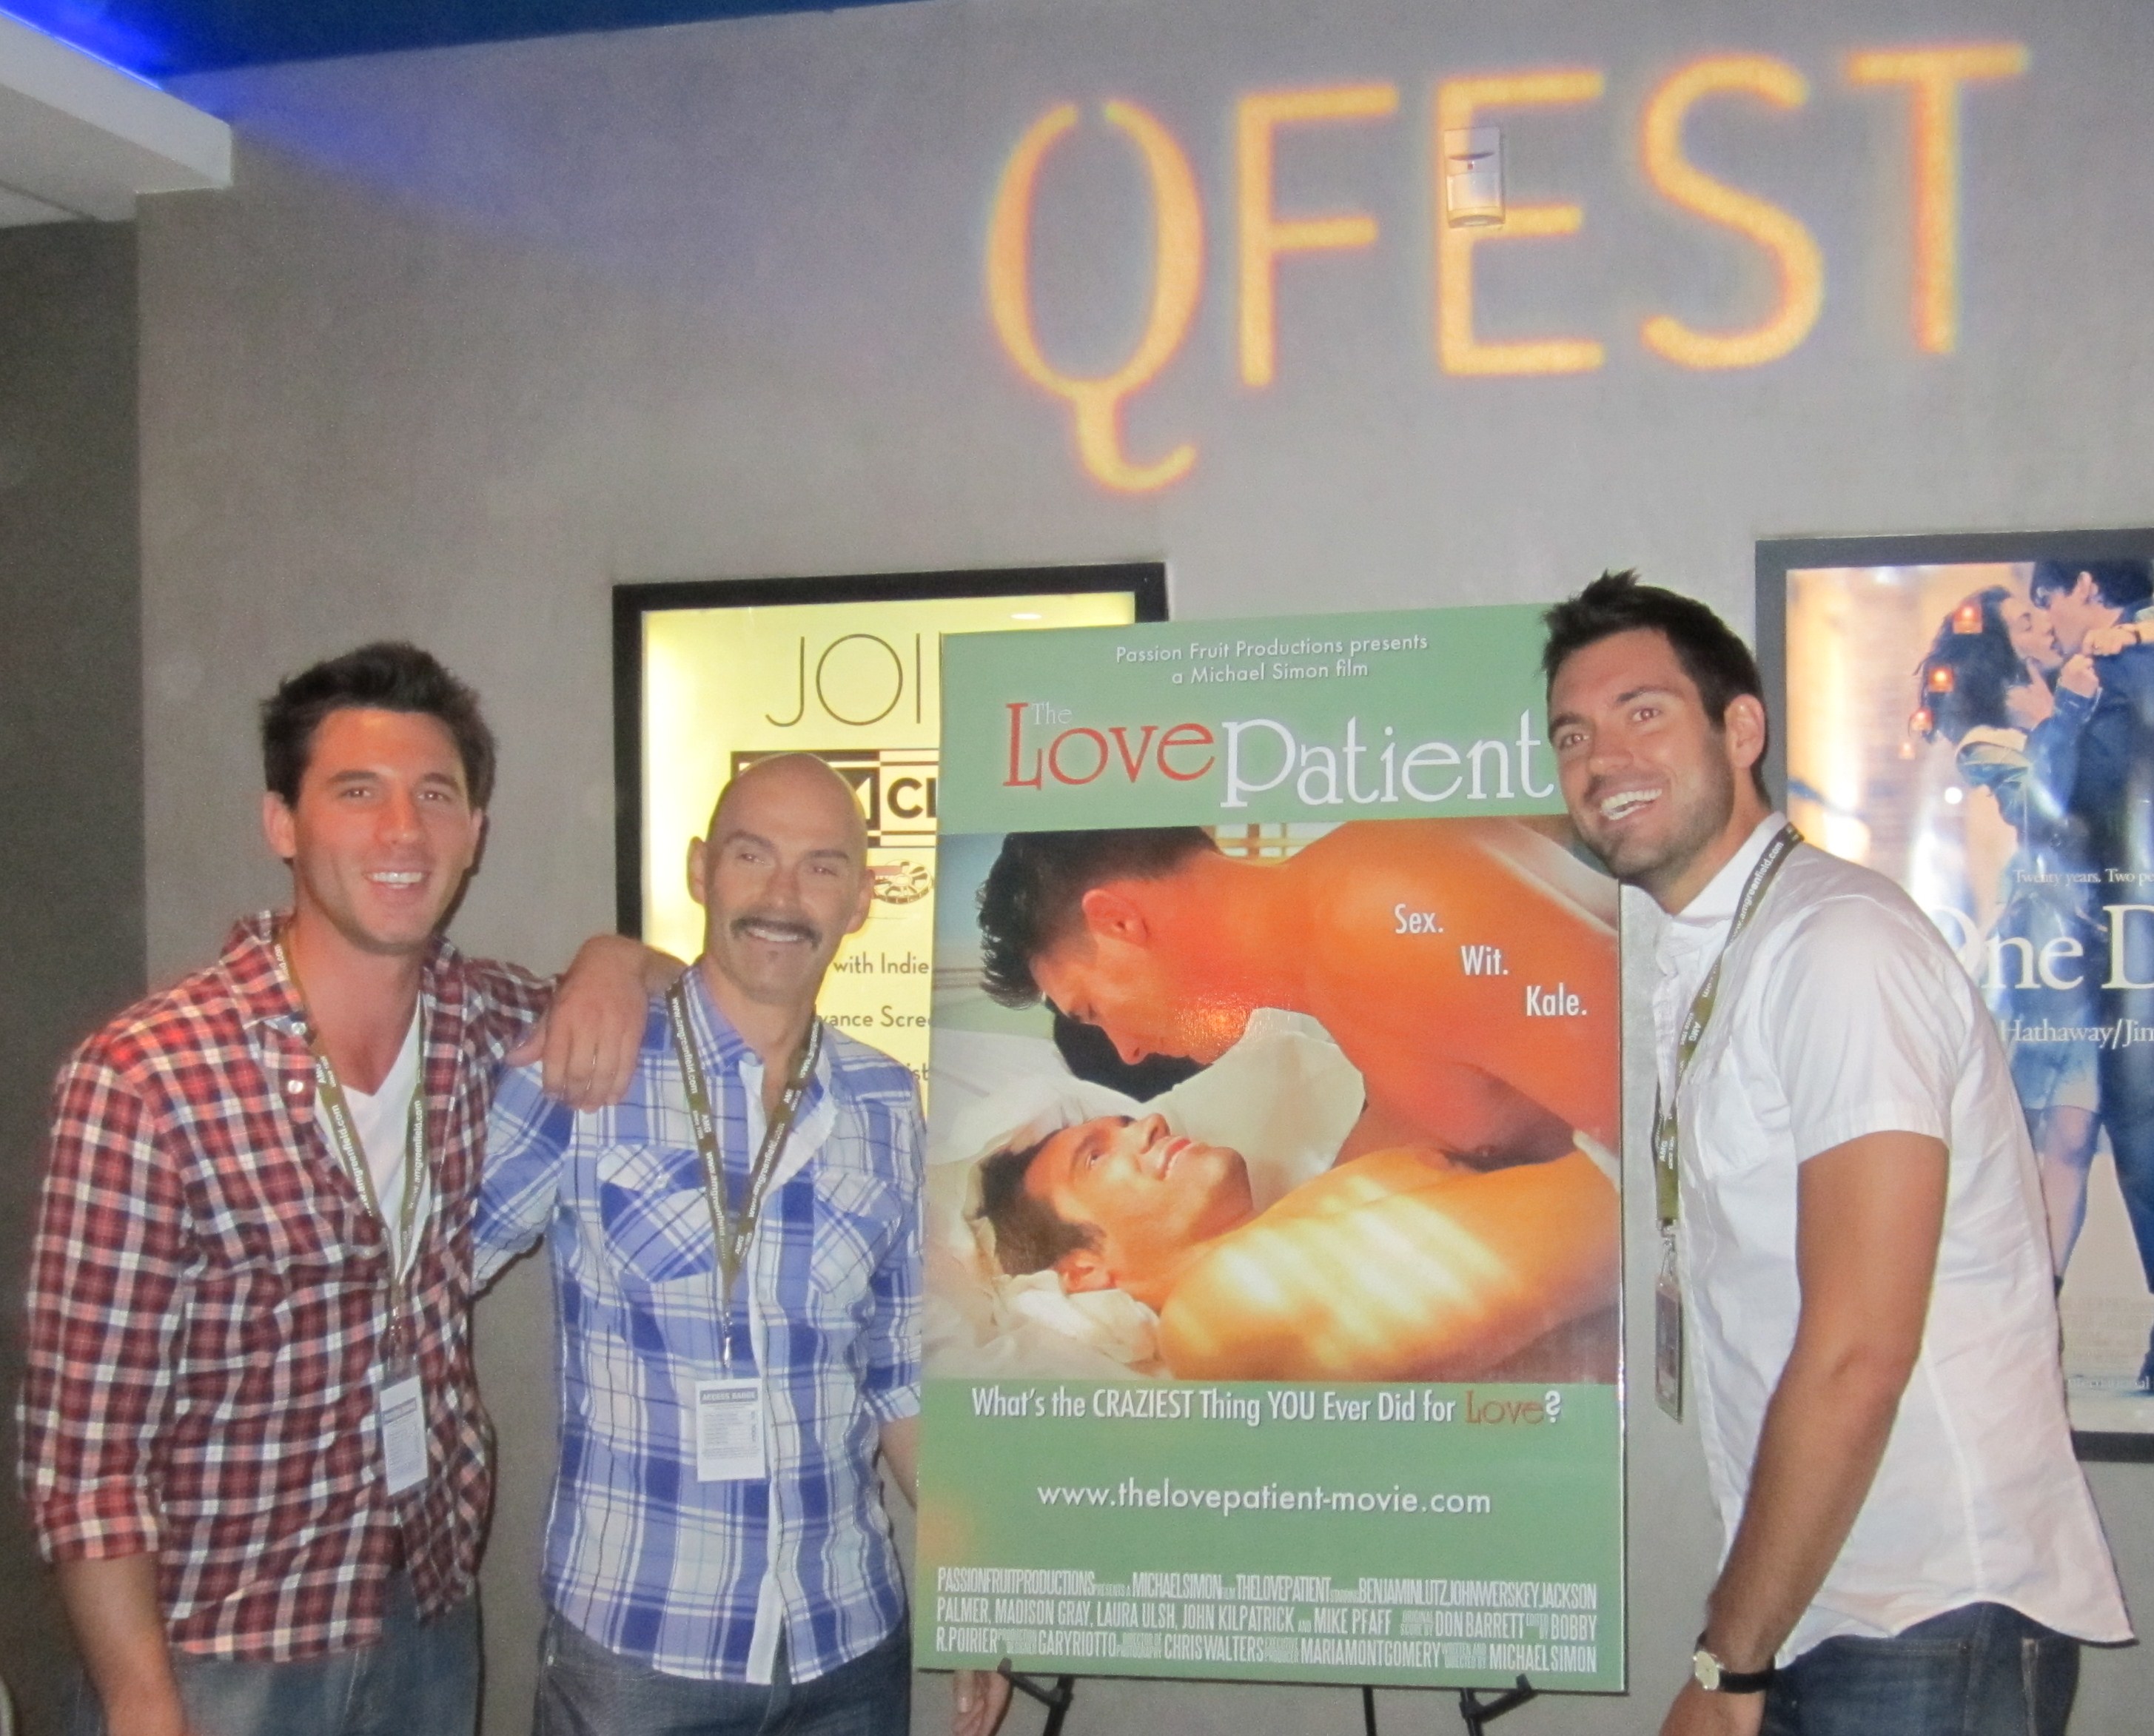 THE LOVE PATIENT world premier, Q-fest, Philadelphia, PA 2011, with director Michael Simon (Md) and Benjamin Lutz (Rt).